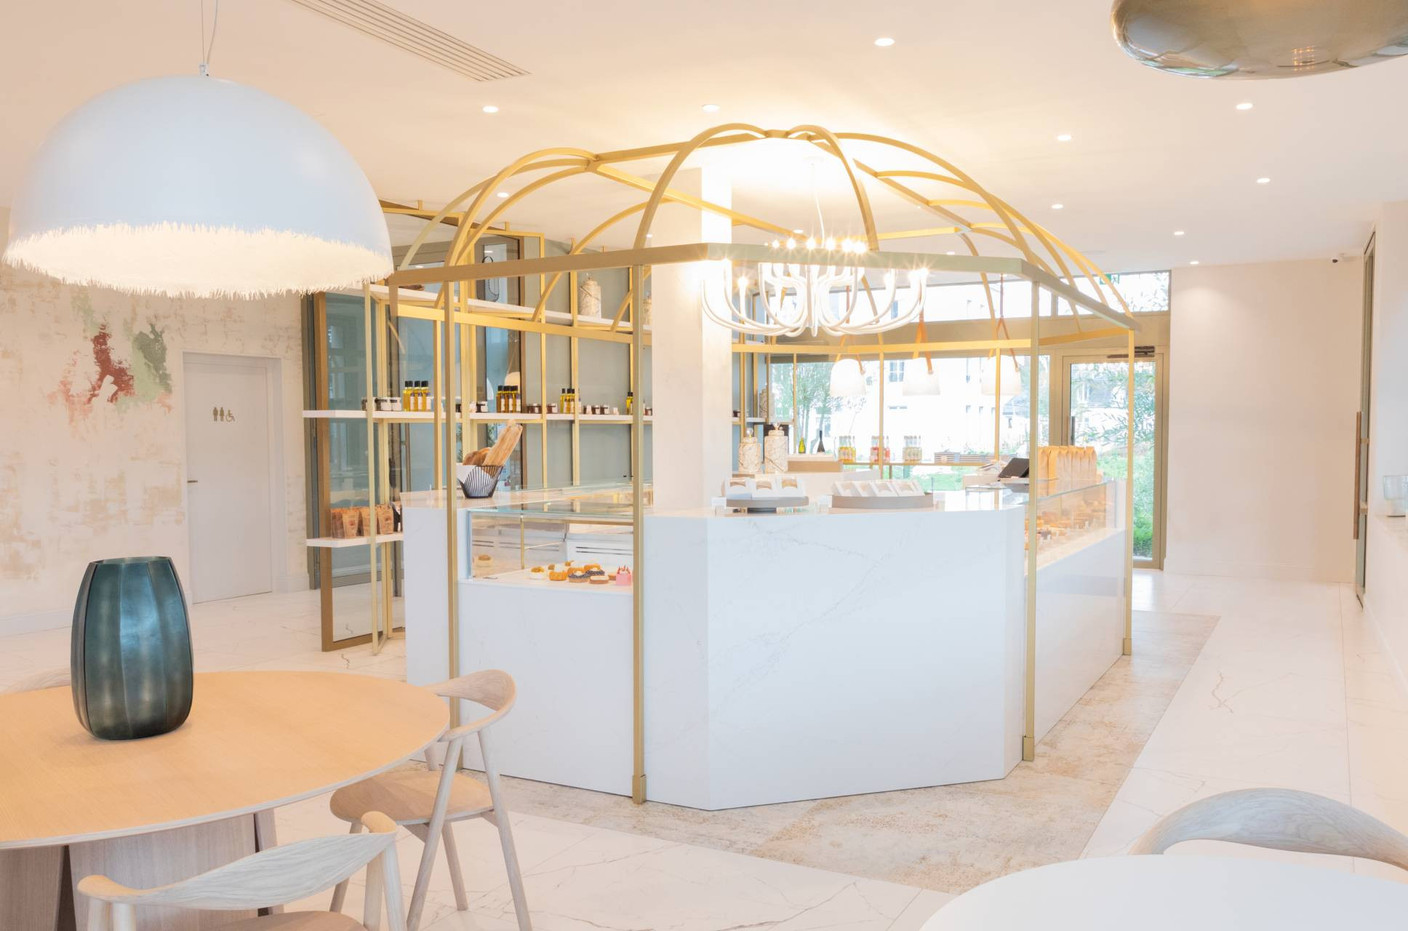 The pastry kiosk is a concept developed by Hay that he would like to develop in other locations. Photo: Fleur de Loire